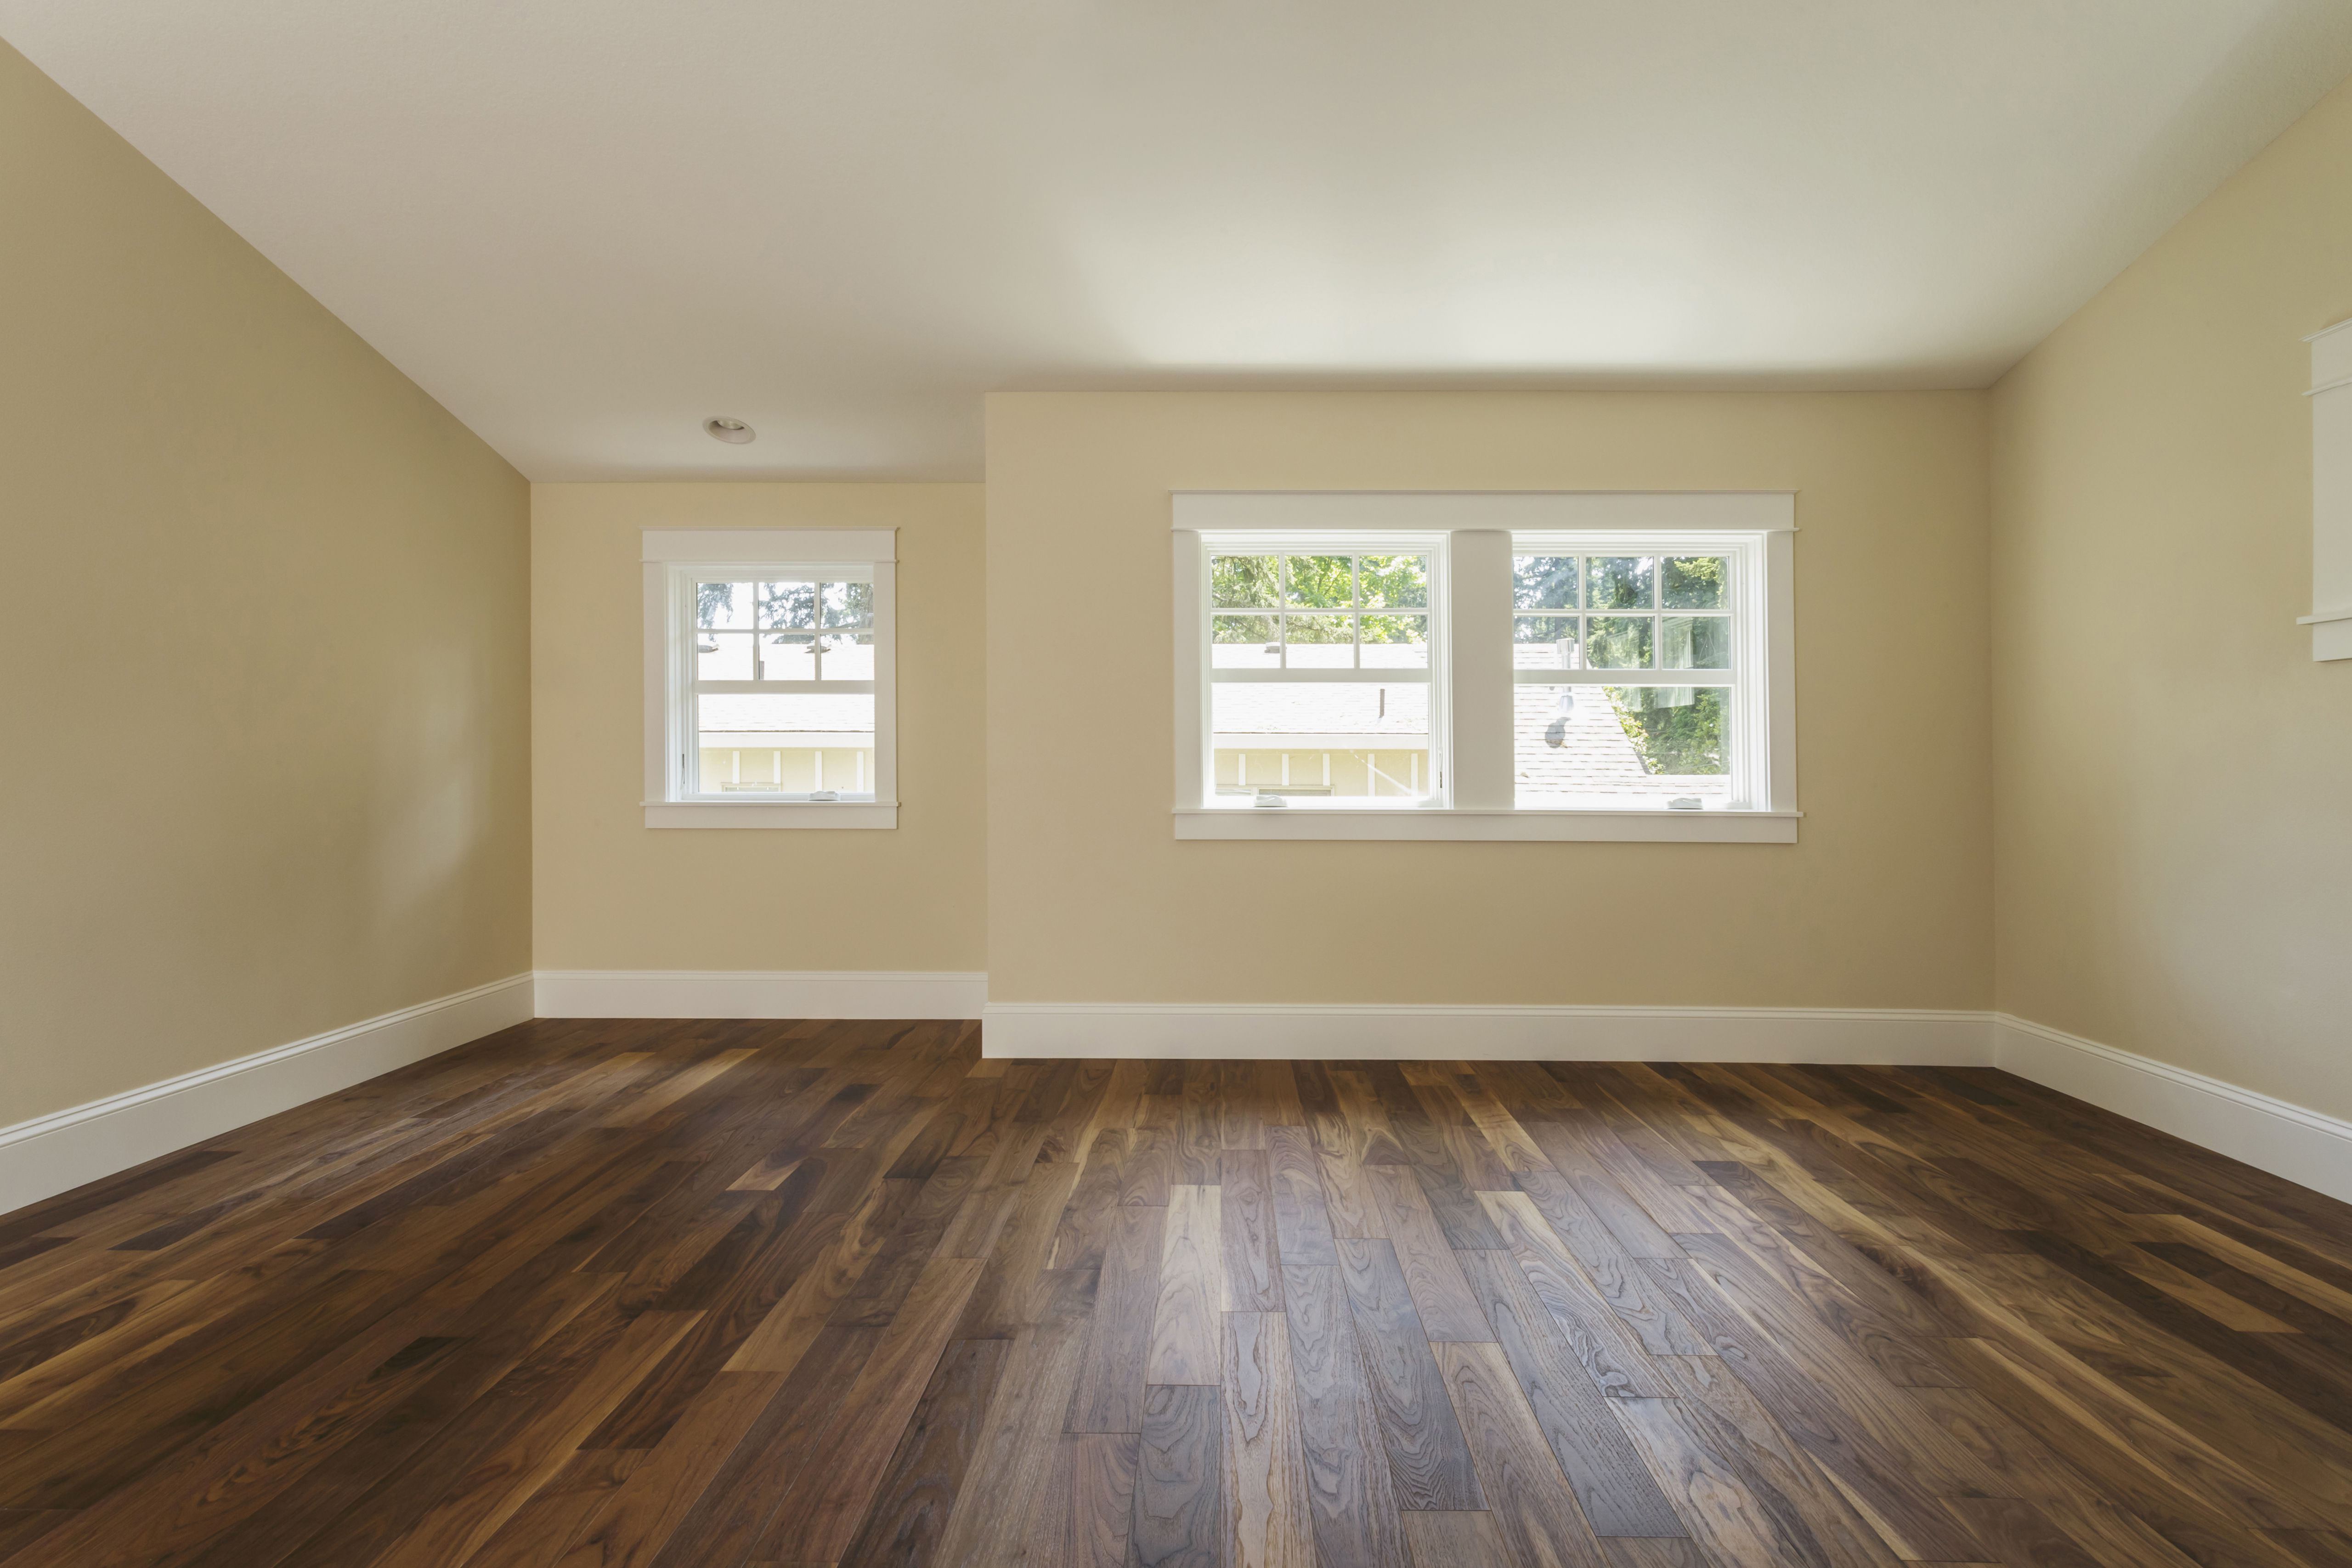 13 Stunning tools Needed for Hardwood Flooring 2024 free download tools needed for hardwood flooring of its easy and fast to install plank vinyl flooring for wooden floor in empty bedroom 482143001 588bd5f45f9b5874eebd56e9